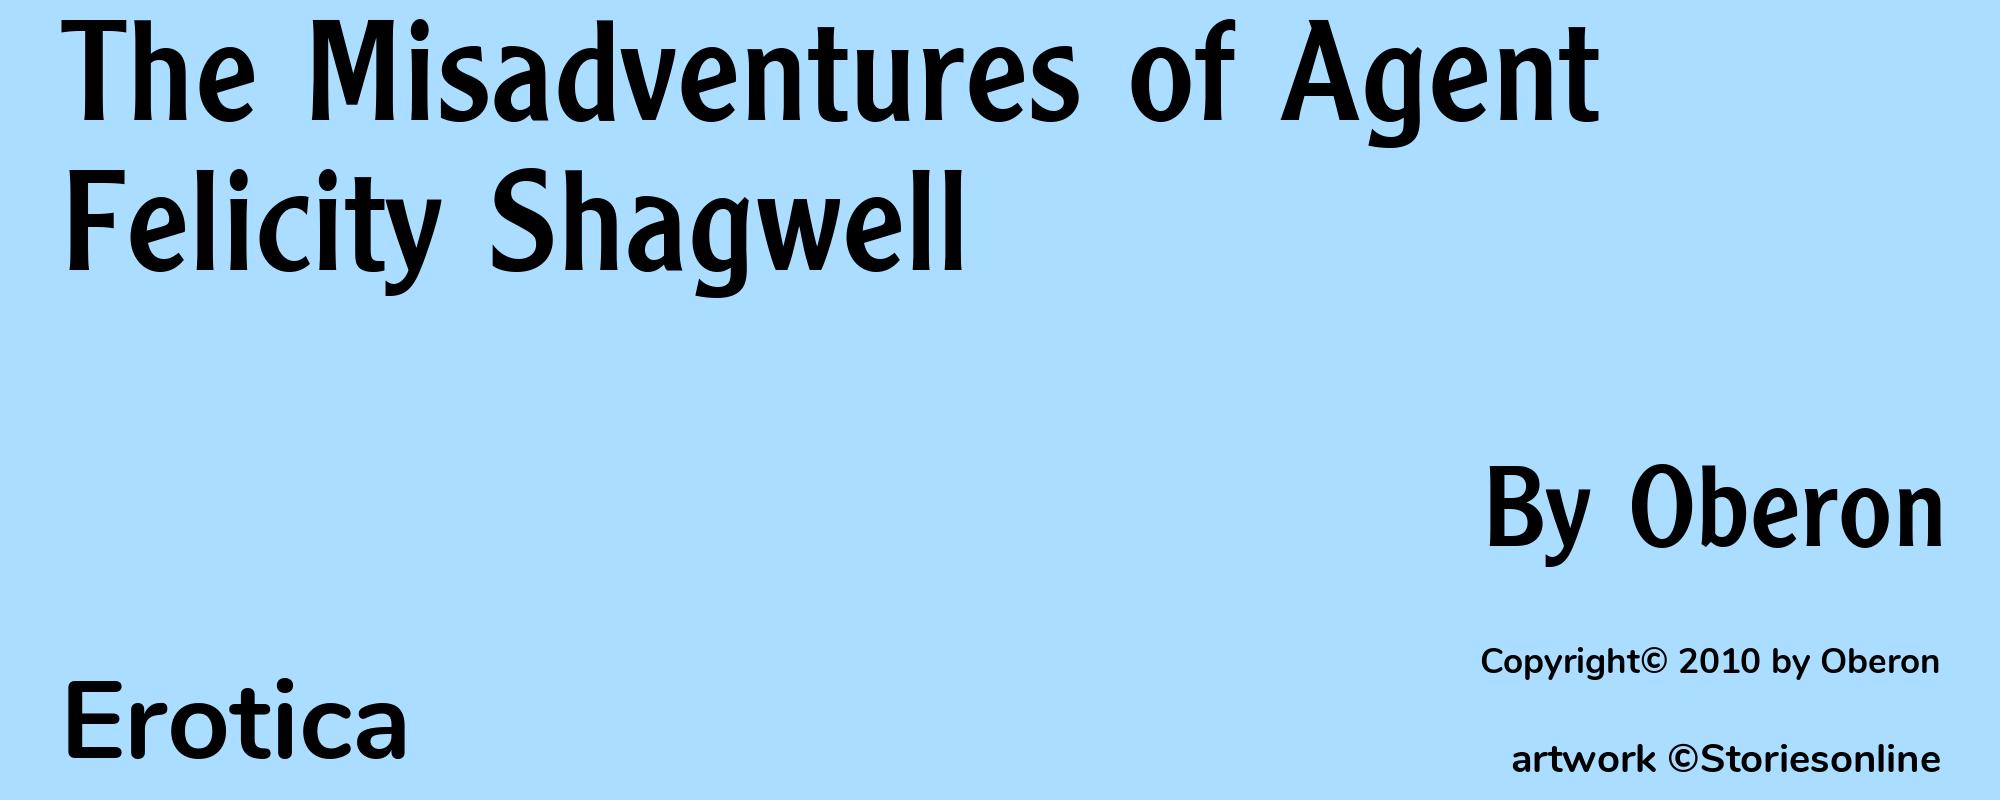 The Misadventures of Agent Felicity Shagwell - Cover